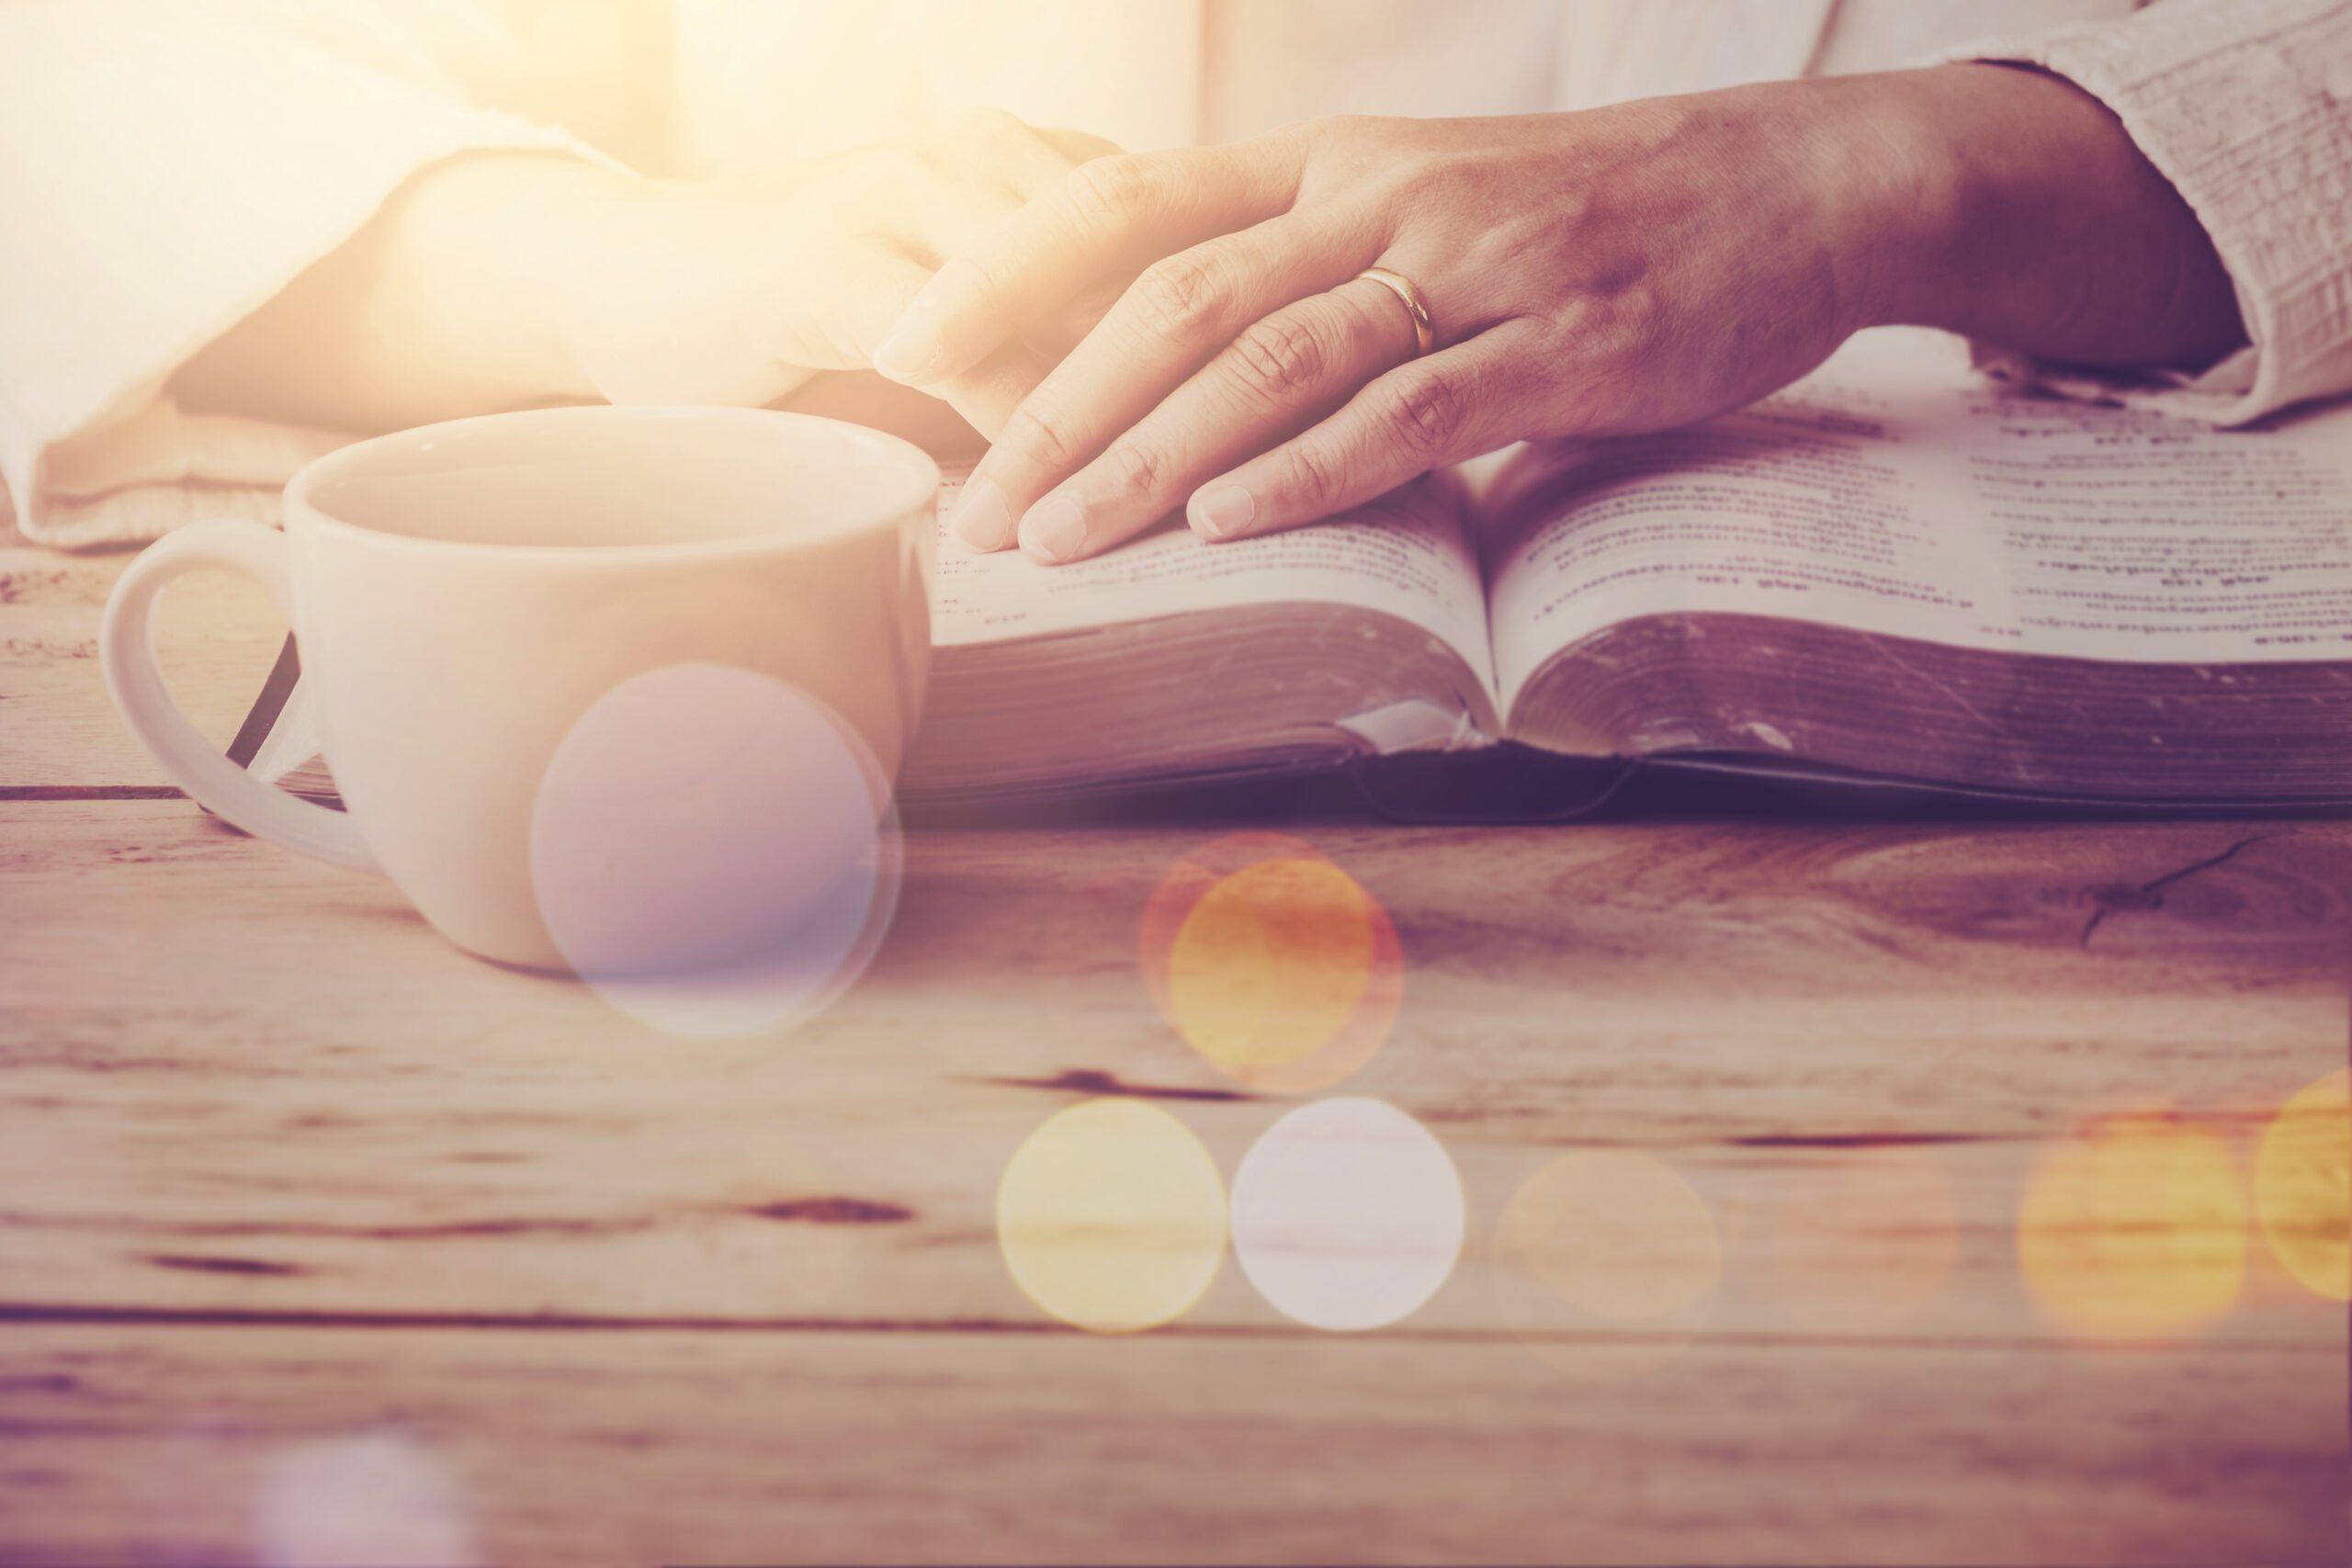 4 Questions to Simplify Your Bible Study Routine